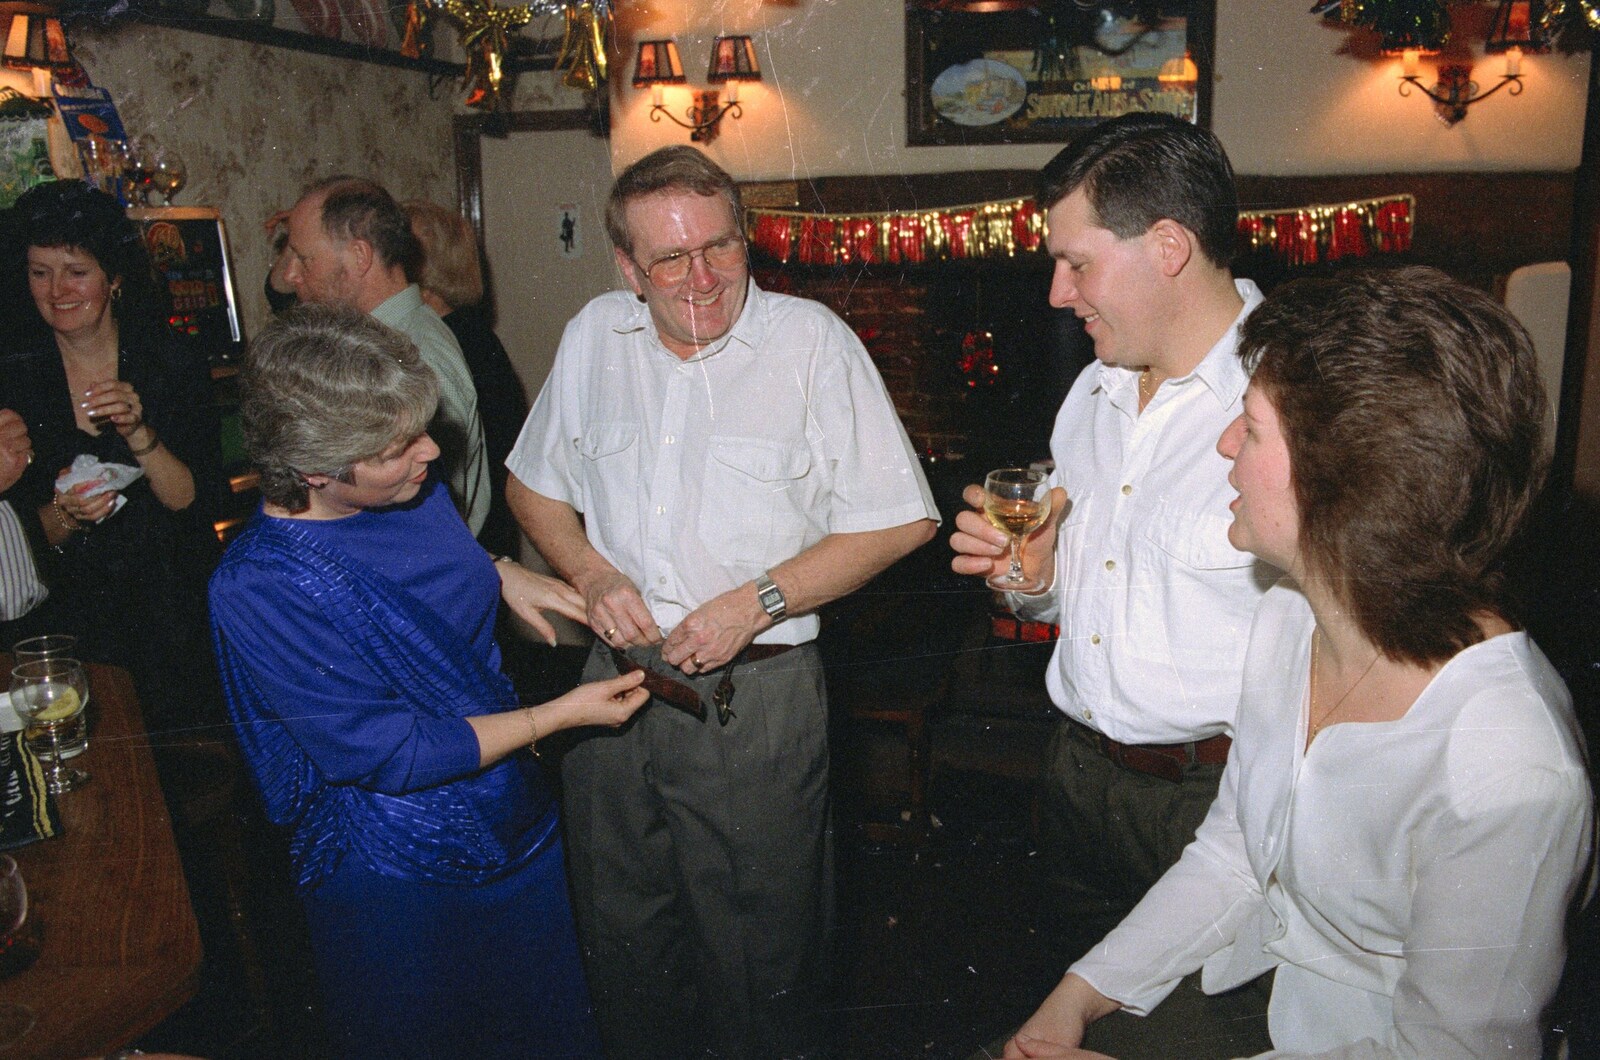 John Willy makes some adjustments from New Year's Eve at the Swan Inn, Brome, Suffolk - 31st December 1991